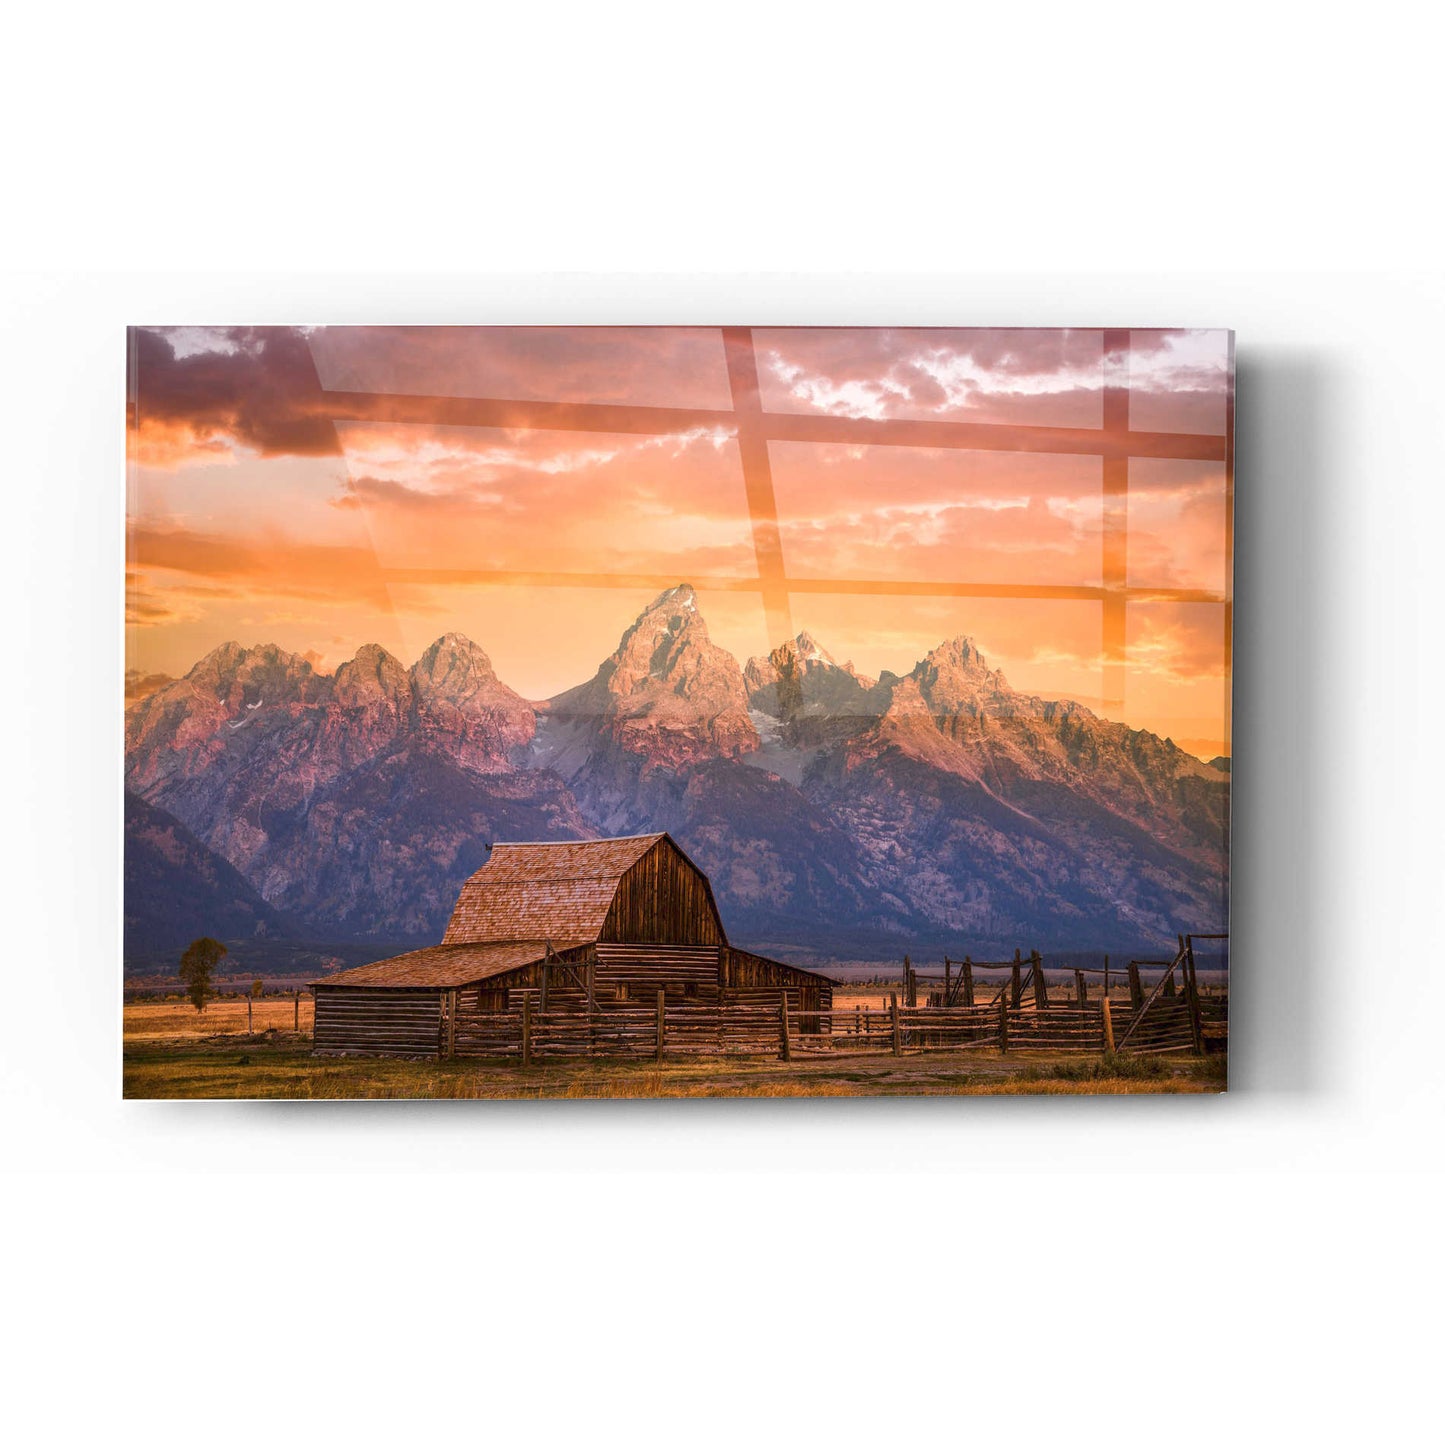 Epic Art "Sunrise on the Ranch" by Darren White, Acrylic Glass Wall Art,16x24